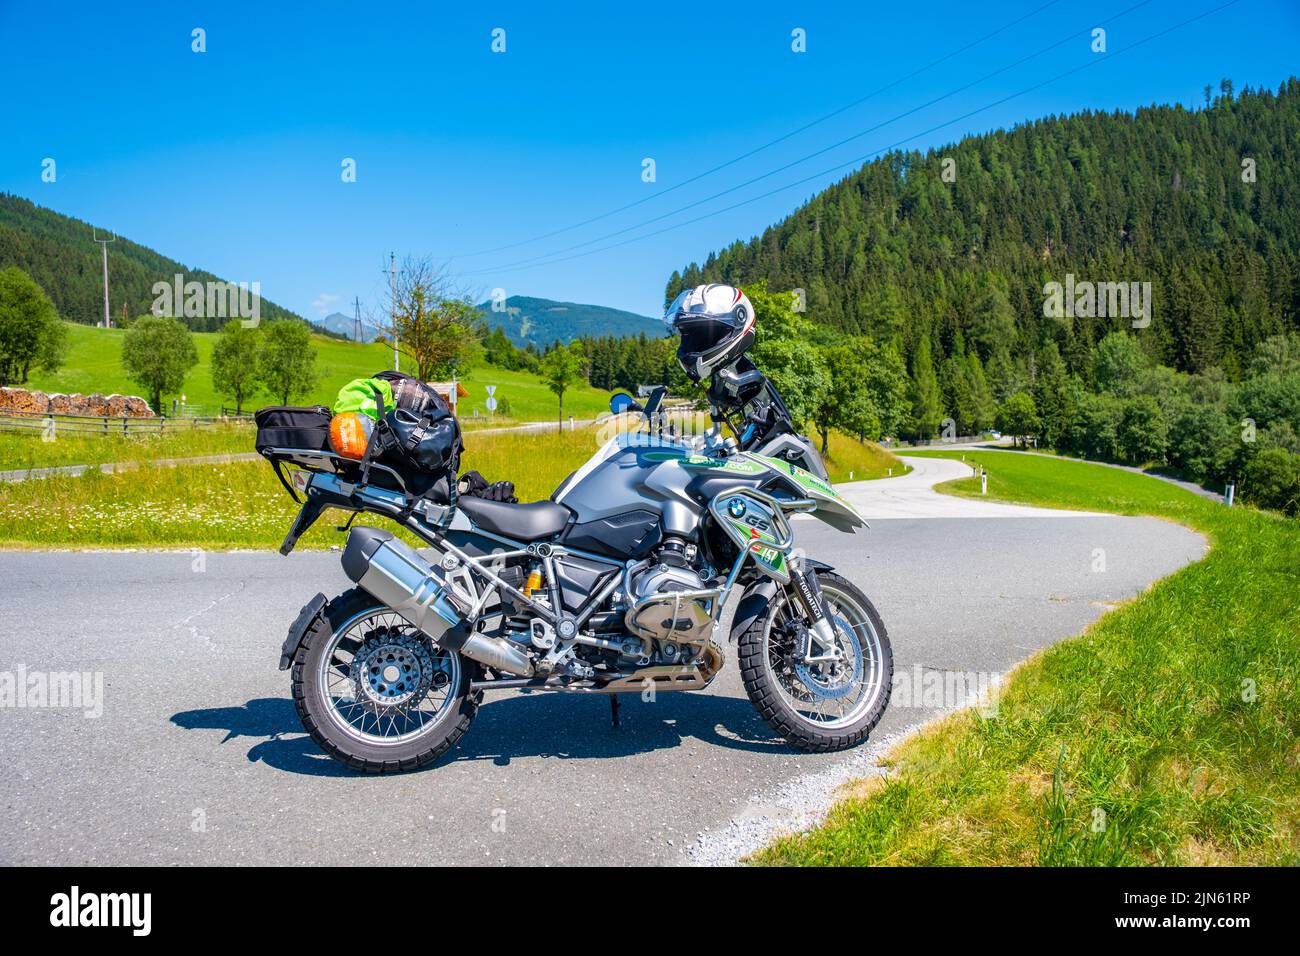 Dolomites Italy - July 2, 2022: Motorcycle with full equipment on the side of a rural mountain alpine road in area of Dolomites, Italy Stock Photo